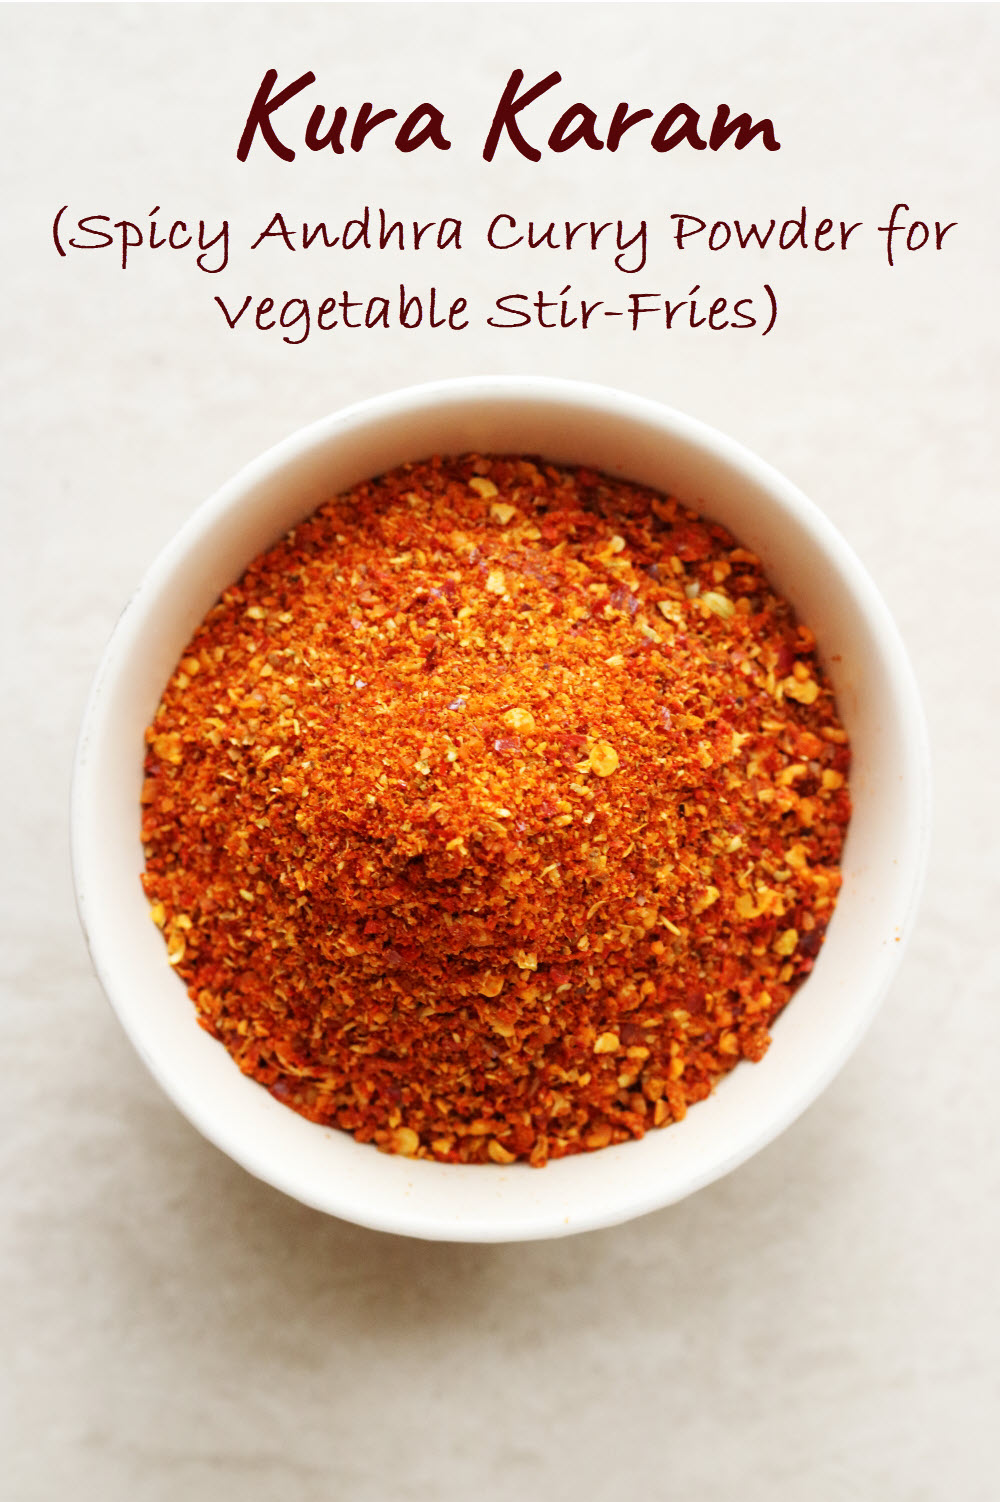 Andhra Kura Karam is the spicy curry powder for vegetable stir-fries.